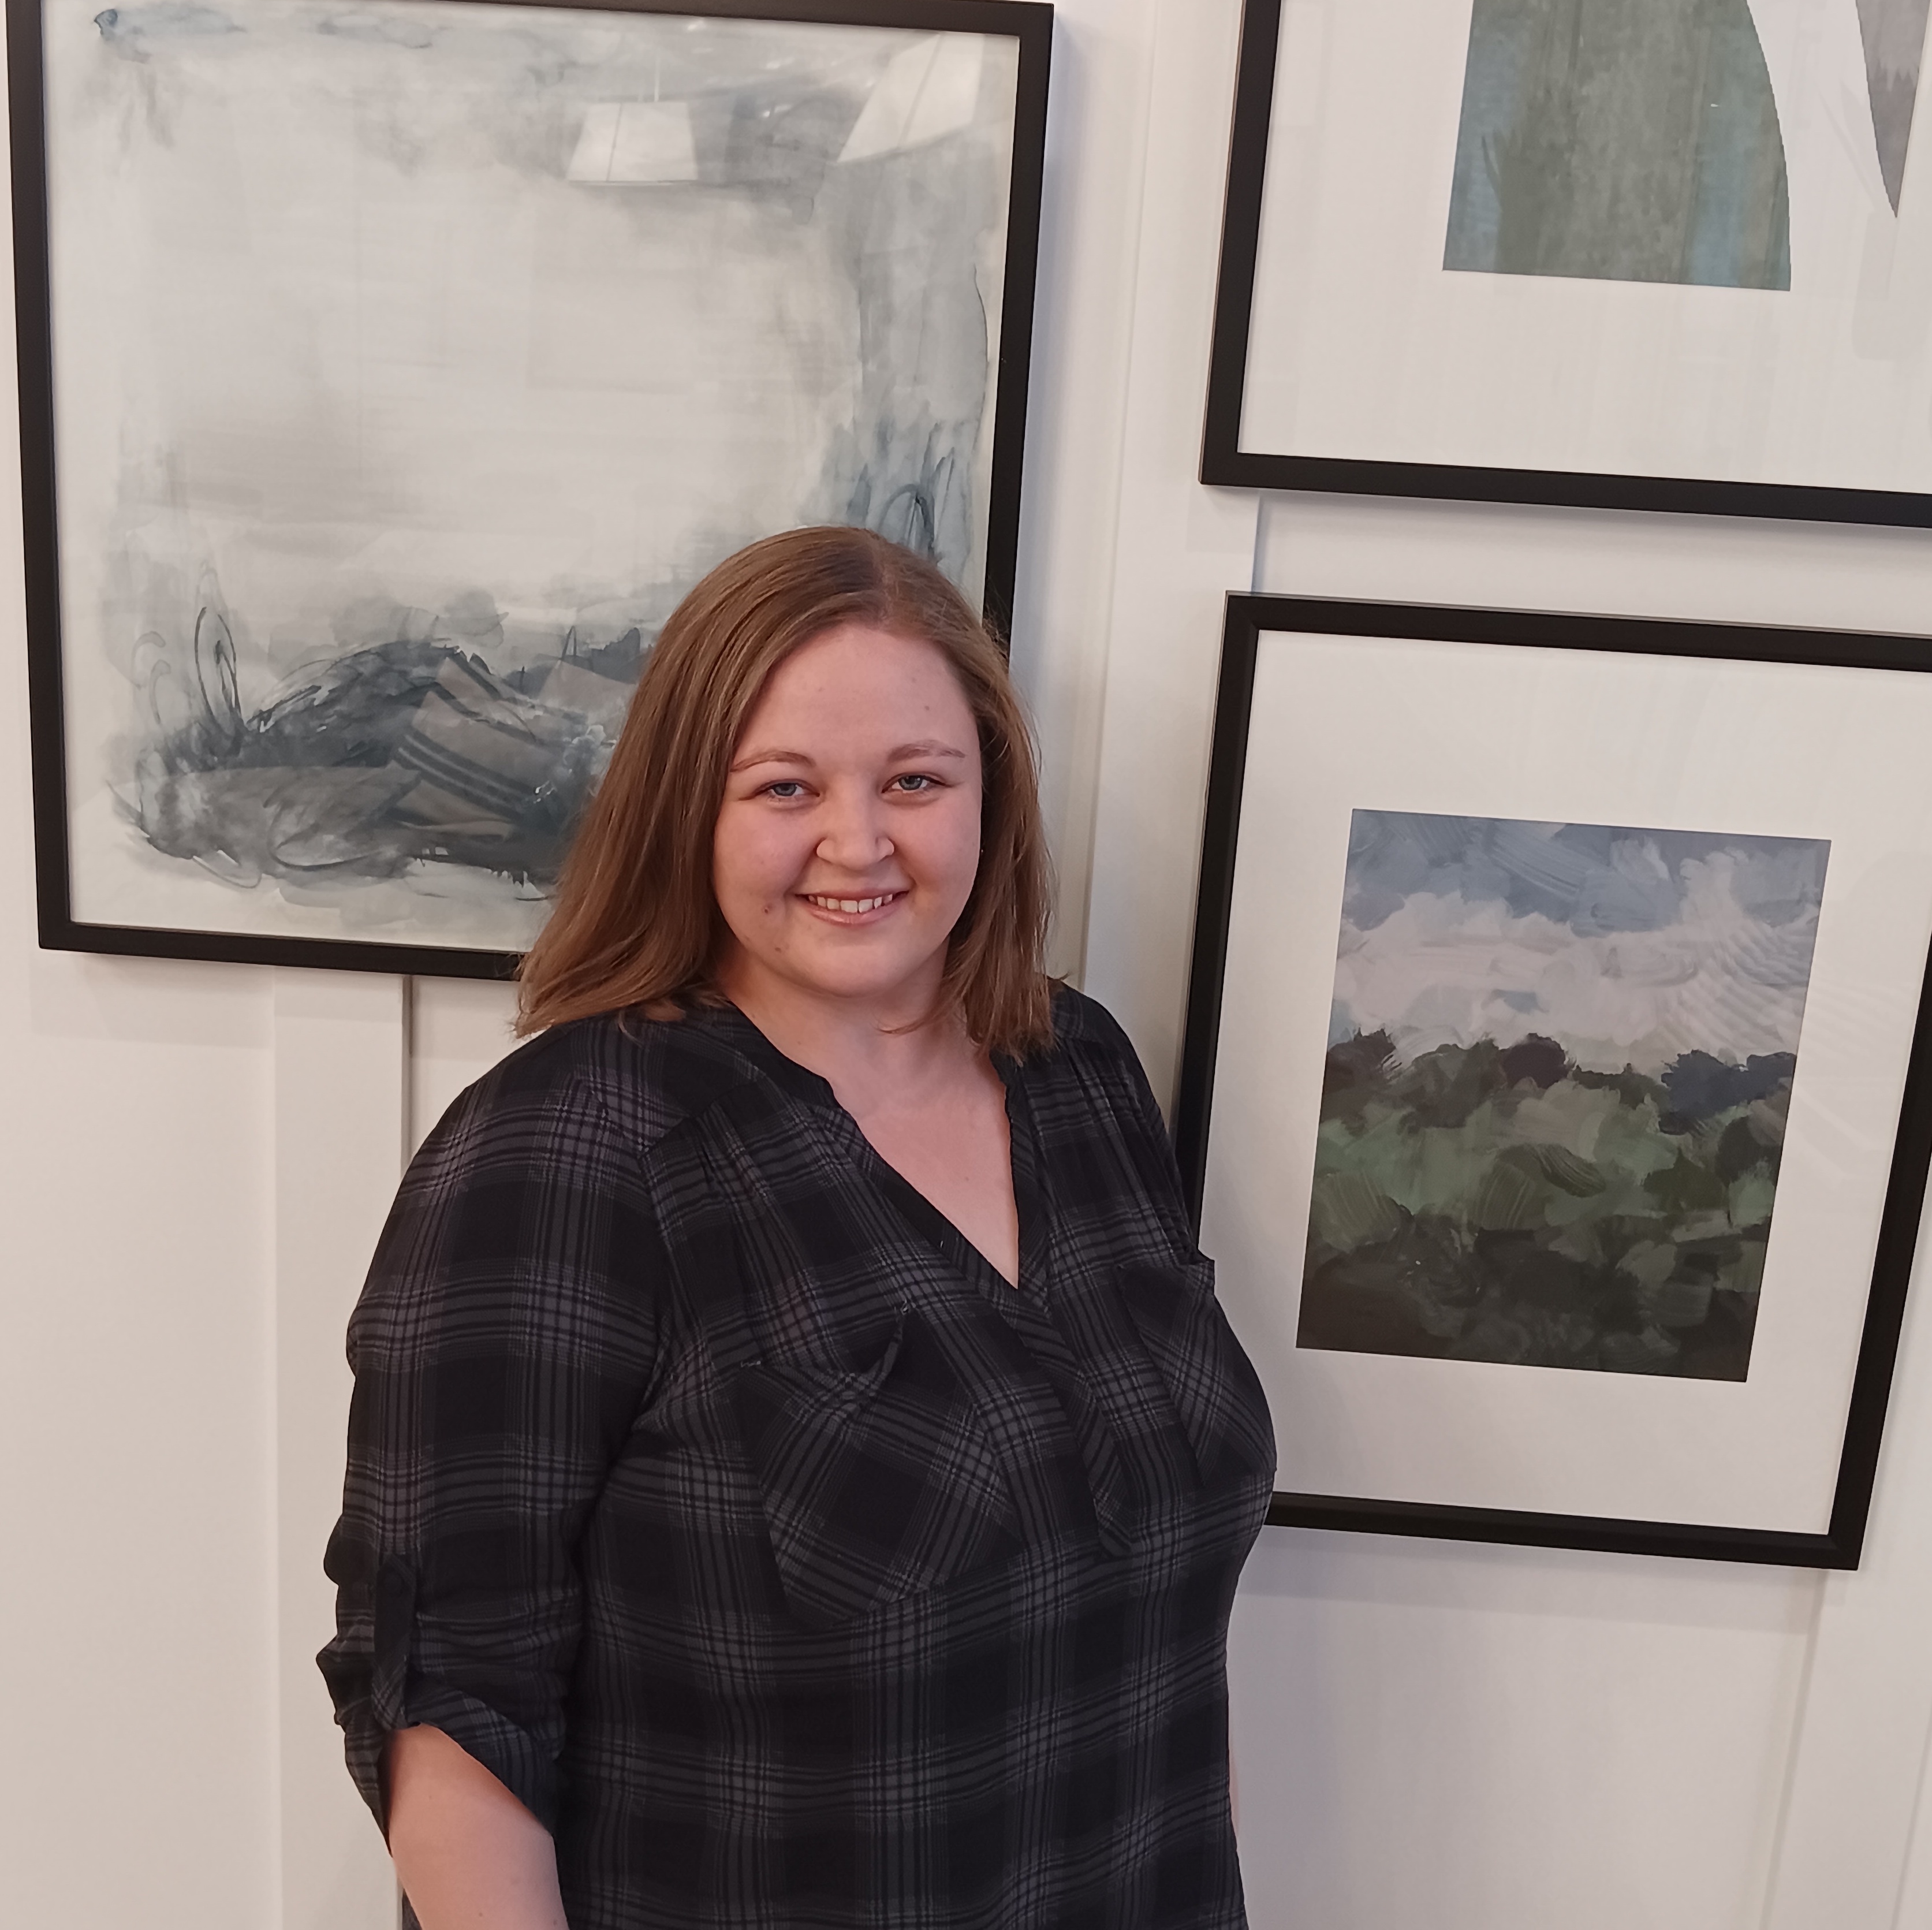 Alyssa is smiling standing in front of a white wall with three paintings hanging behind her.  She has long light brown hair and is wearing a black and gray top.